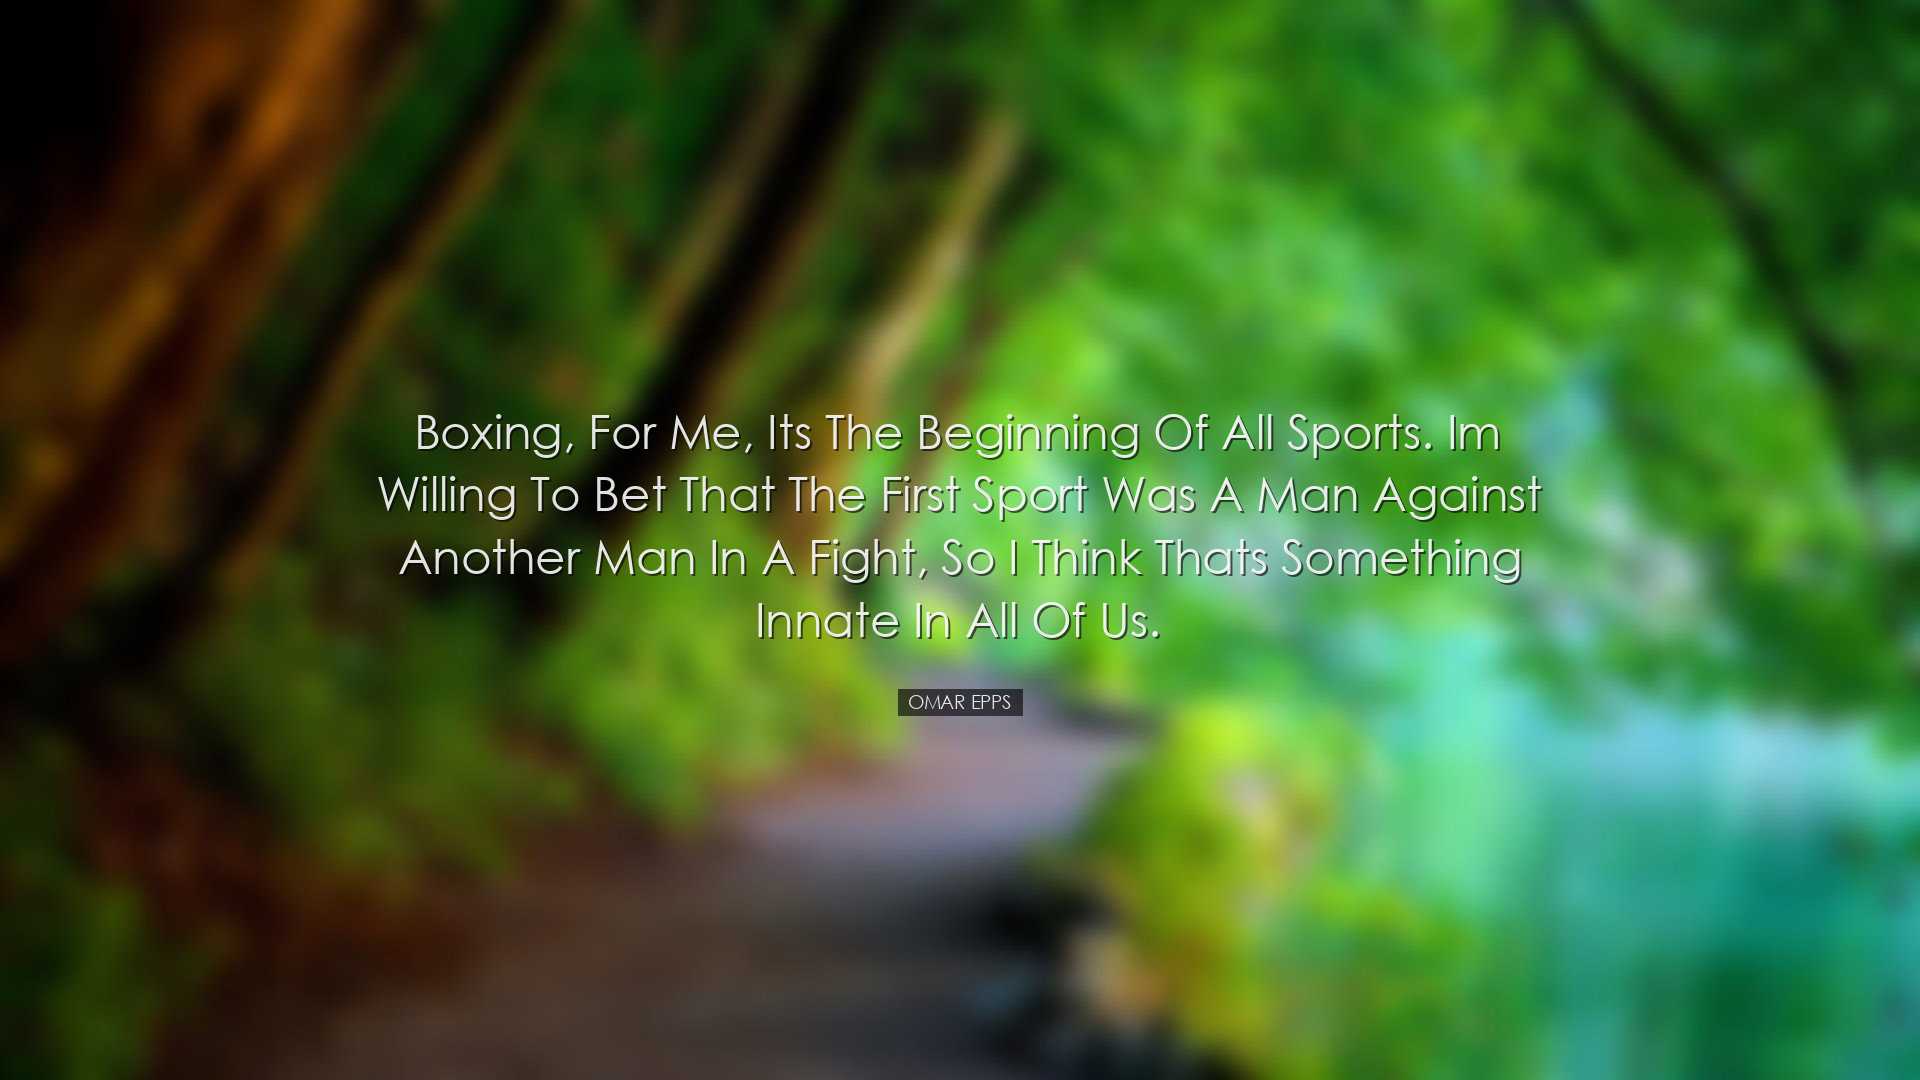 Boxing, for me, its the beginning of all sports. Im willing to bet